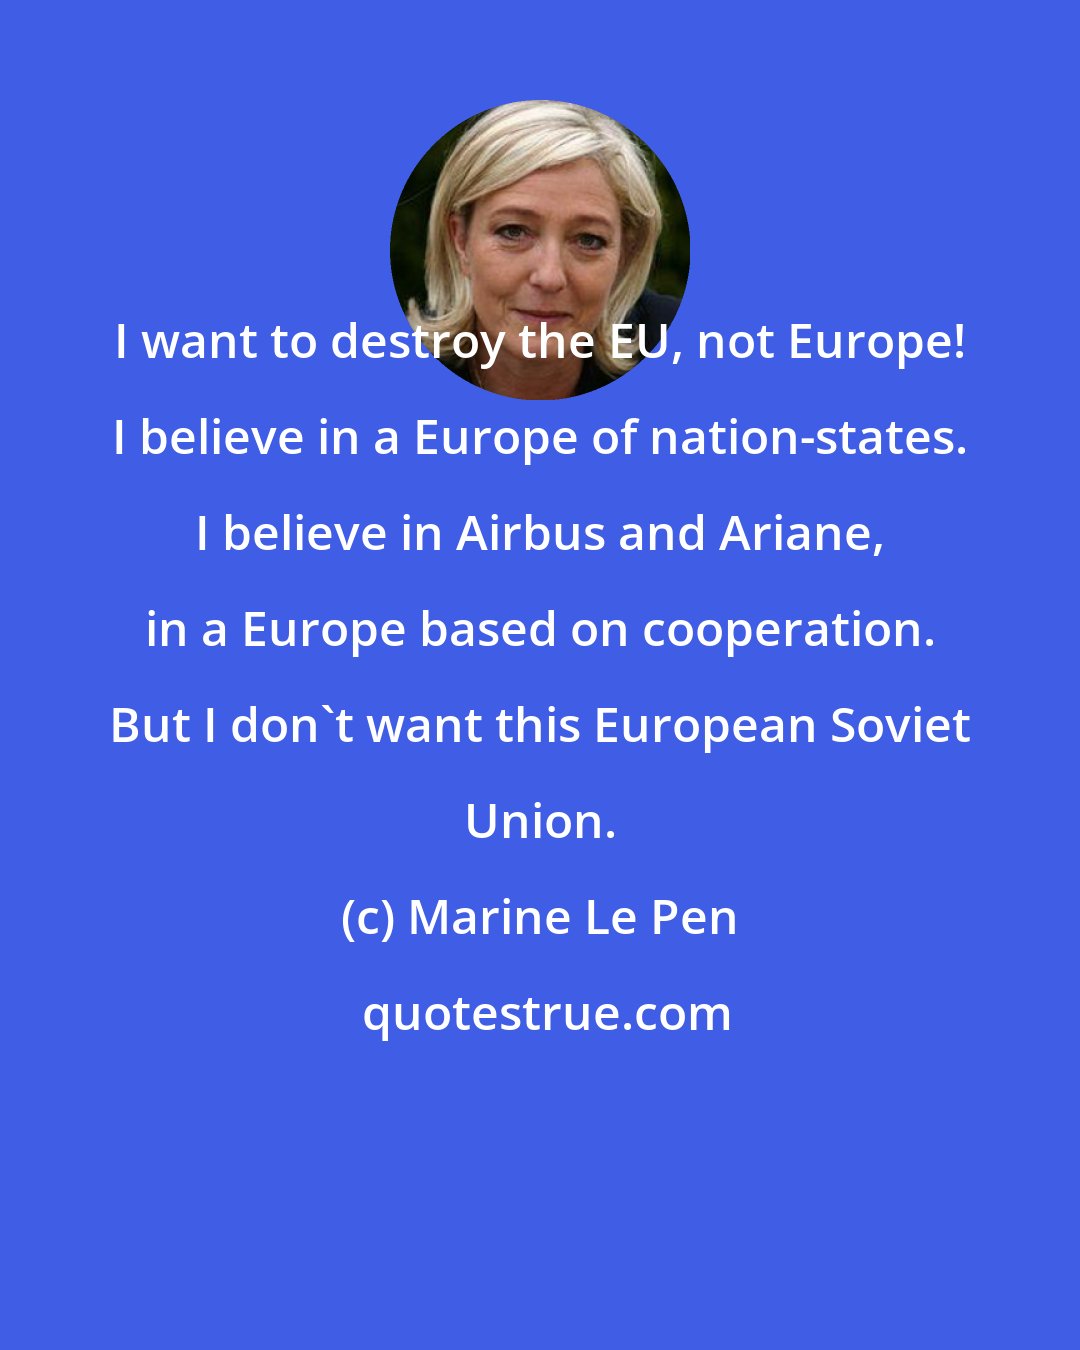 Marine Le Pen: I want to destroy the EU, not Europe! I believe in a Europe of nation-states. I believe in Airbus and Ariane, in a Europe based on cooperation. But I don't want this European Soviet Union.